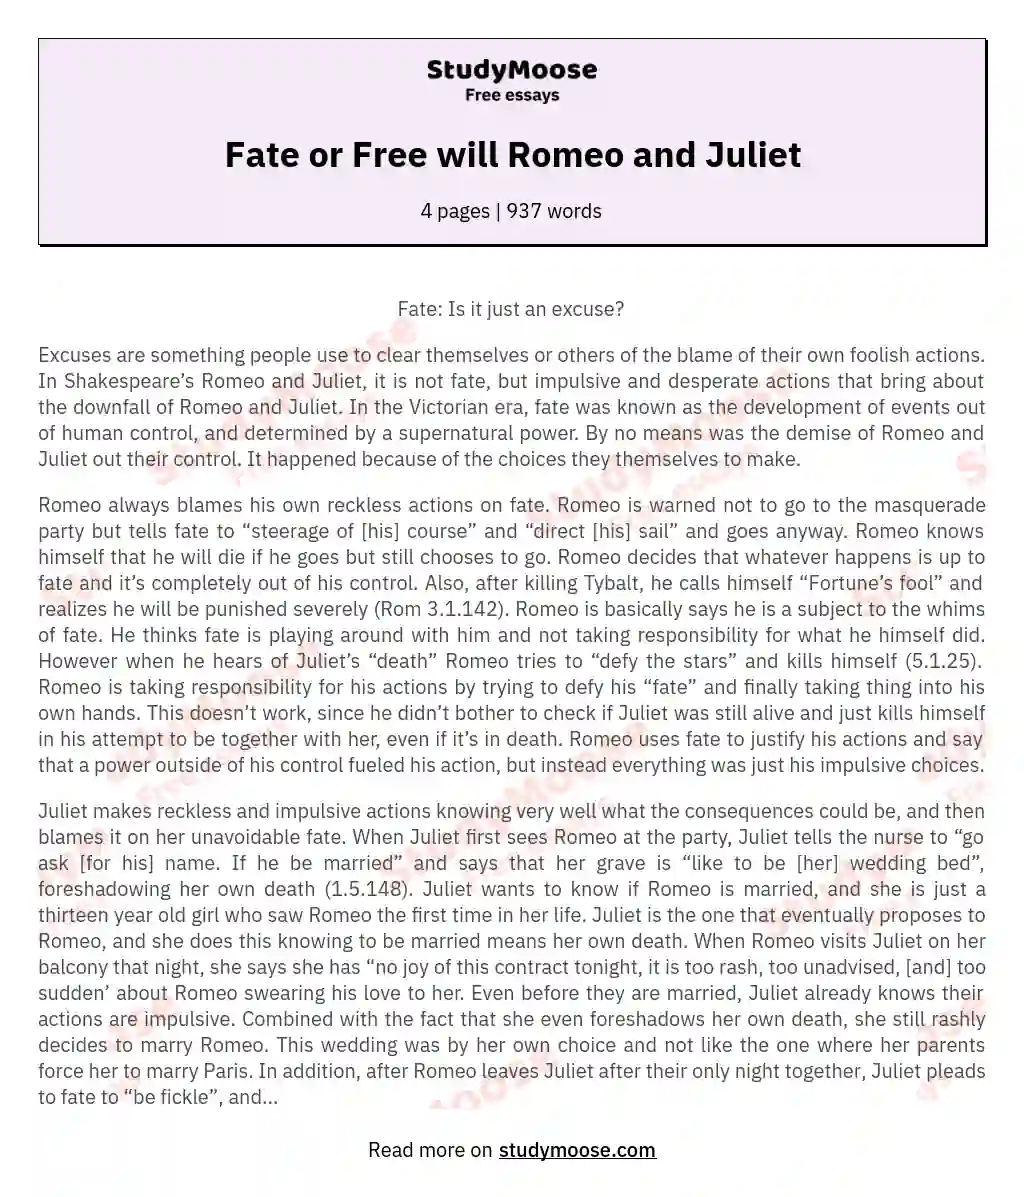 Fate or Free will Romeo and Juliet essay